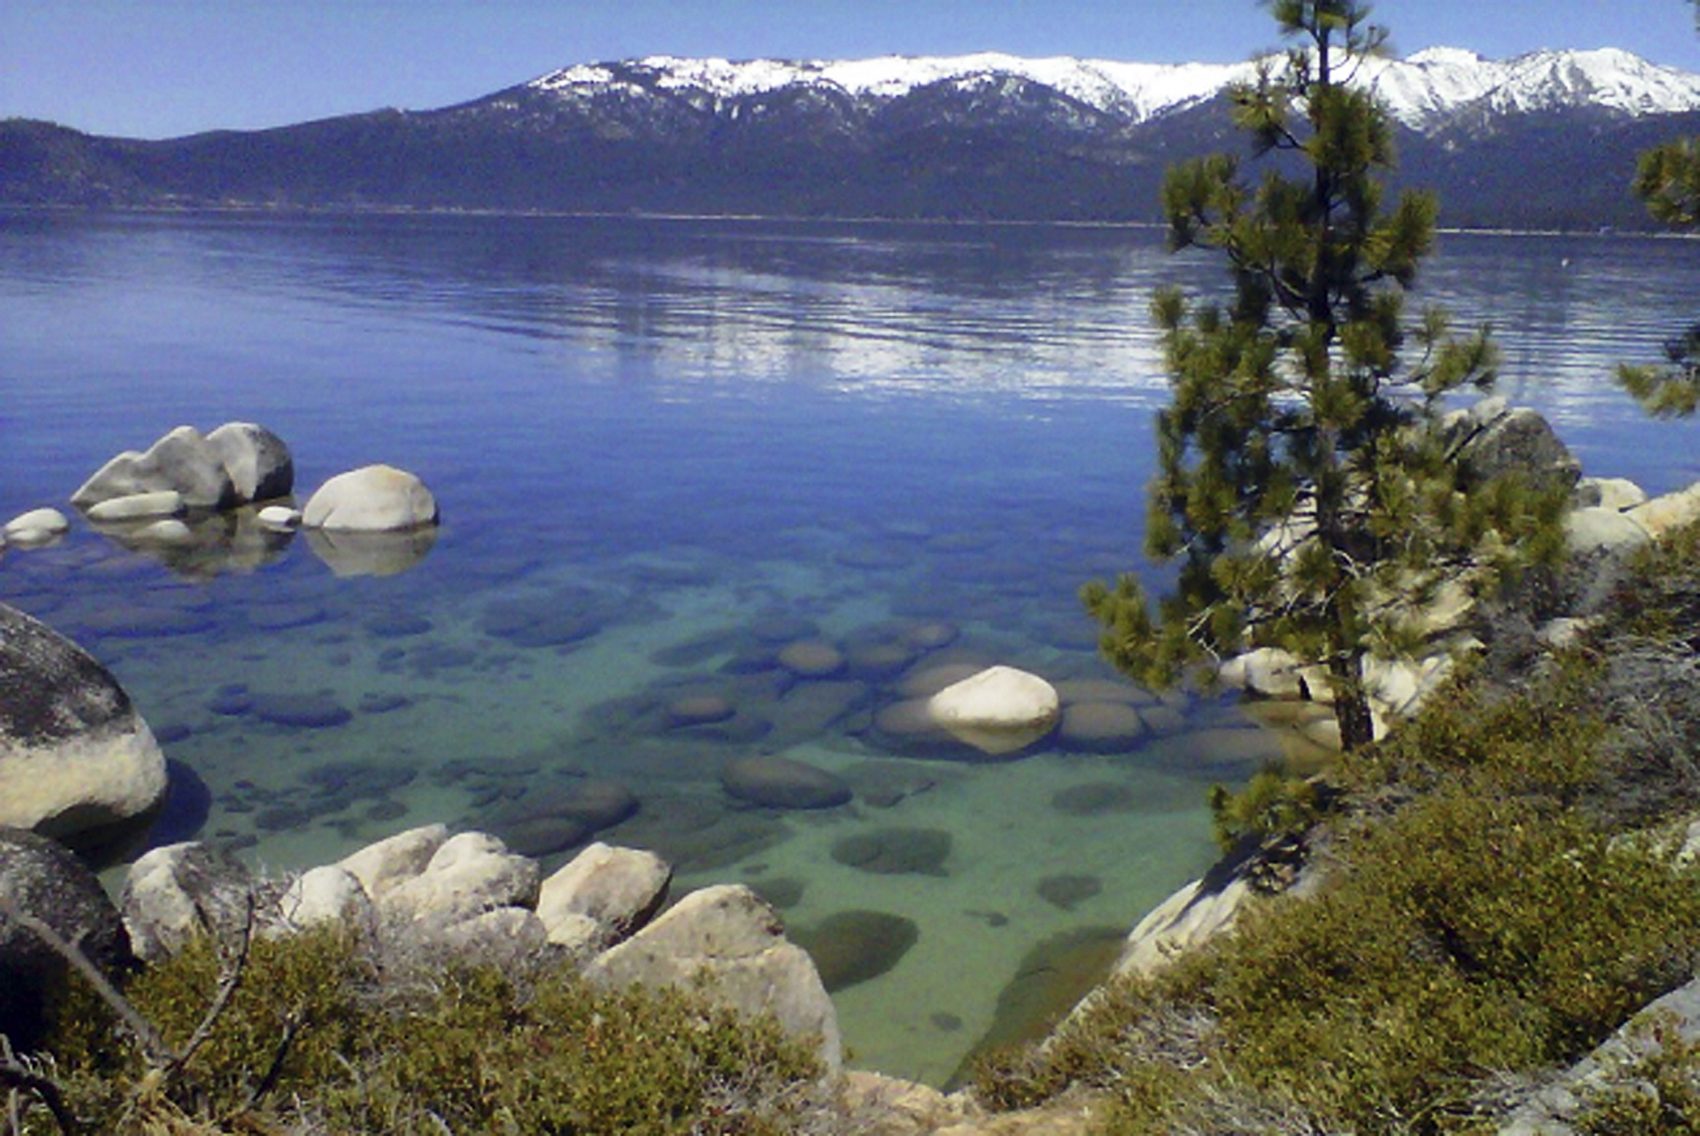 This April 12, 2012 file photo shows Lake Tahoe seen from Incline Village, Nev. An annual report on Lake Tahoe said the United States' largest alpine lake is still warming at 14 times the historic average. (AP Photo/Scott Sonner, File)